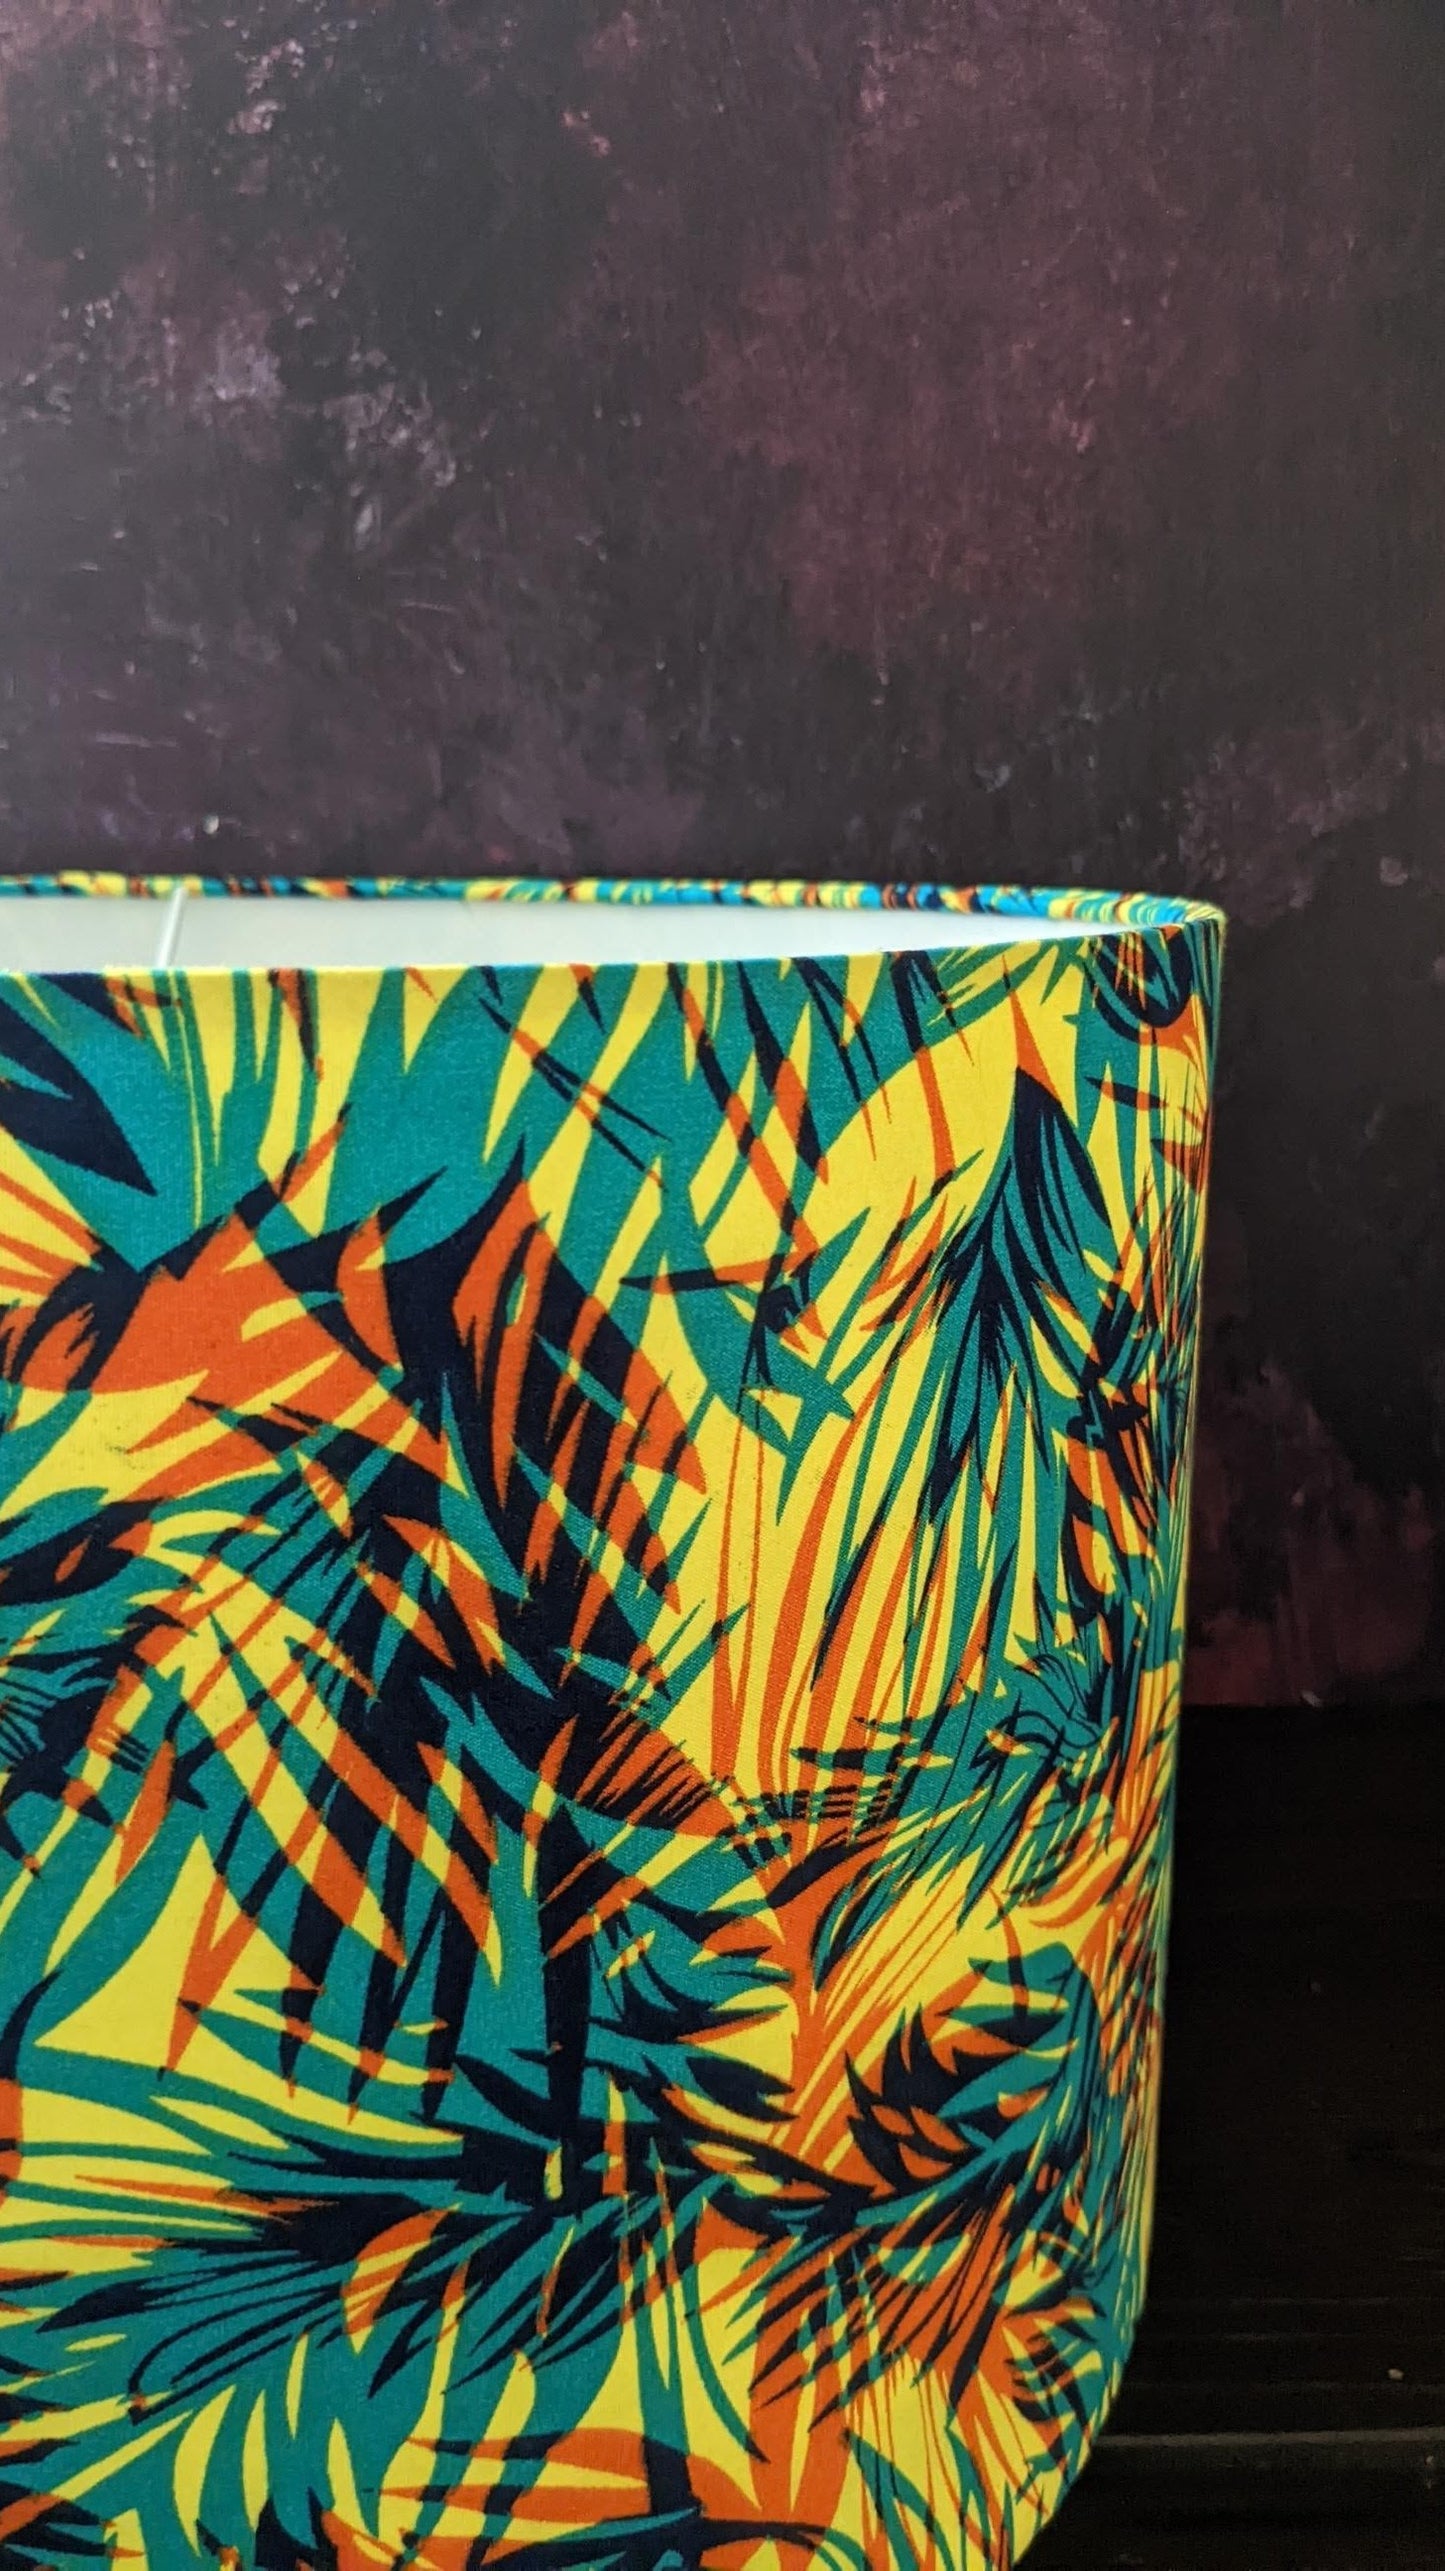 Tropical African Jungle Forest Lampshade LEKKI